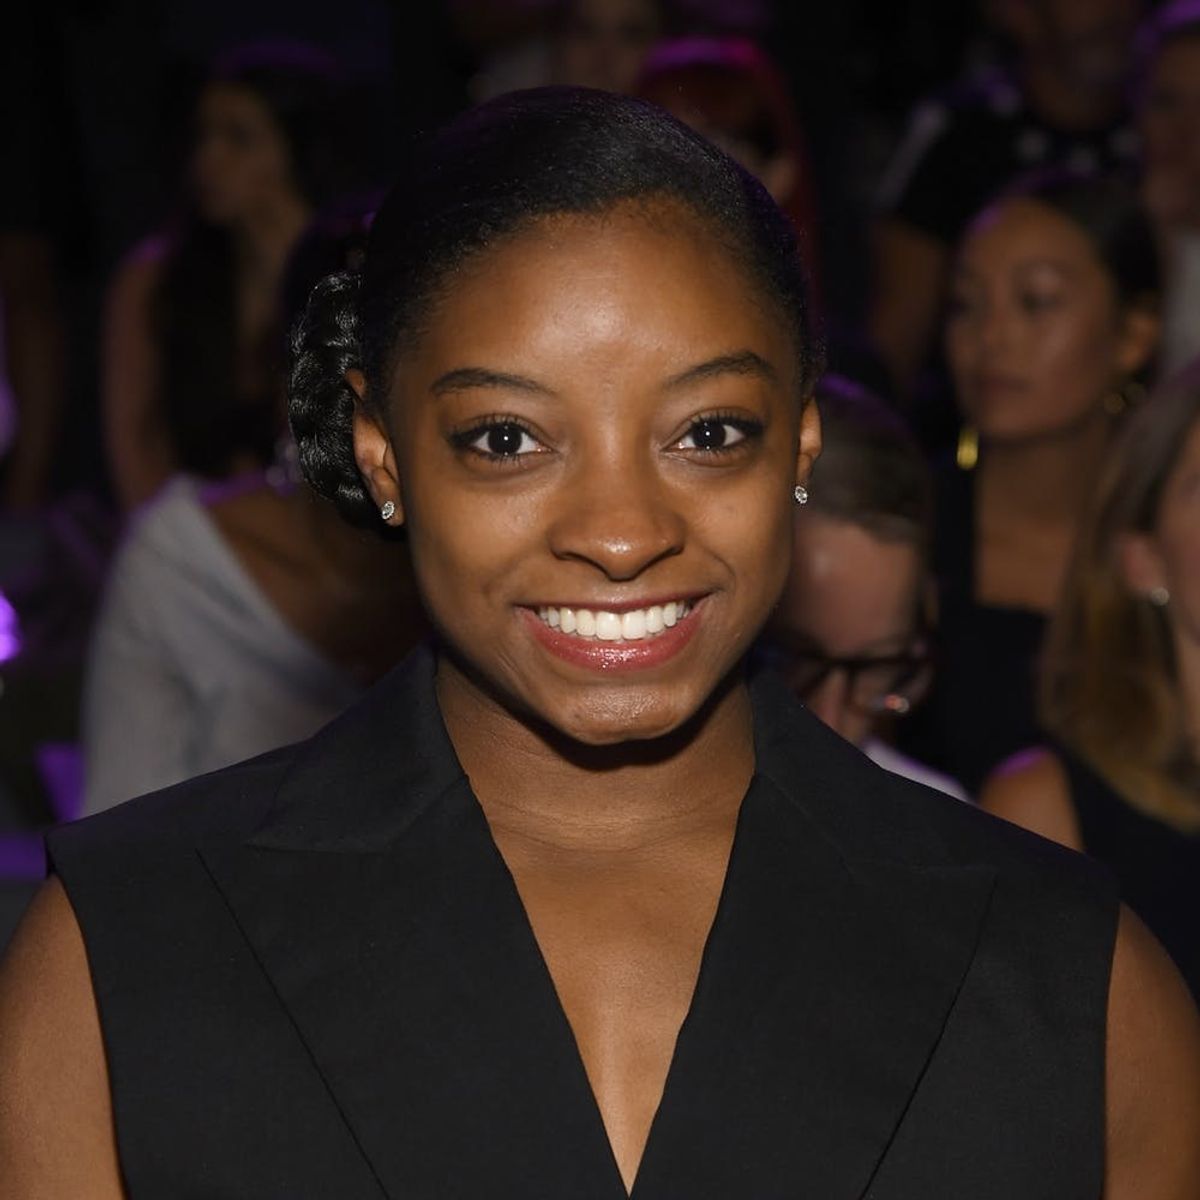 This Is Your First Look at Simone Biles on the Set of Pretty Little Liars